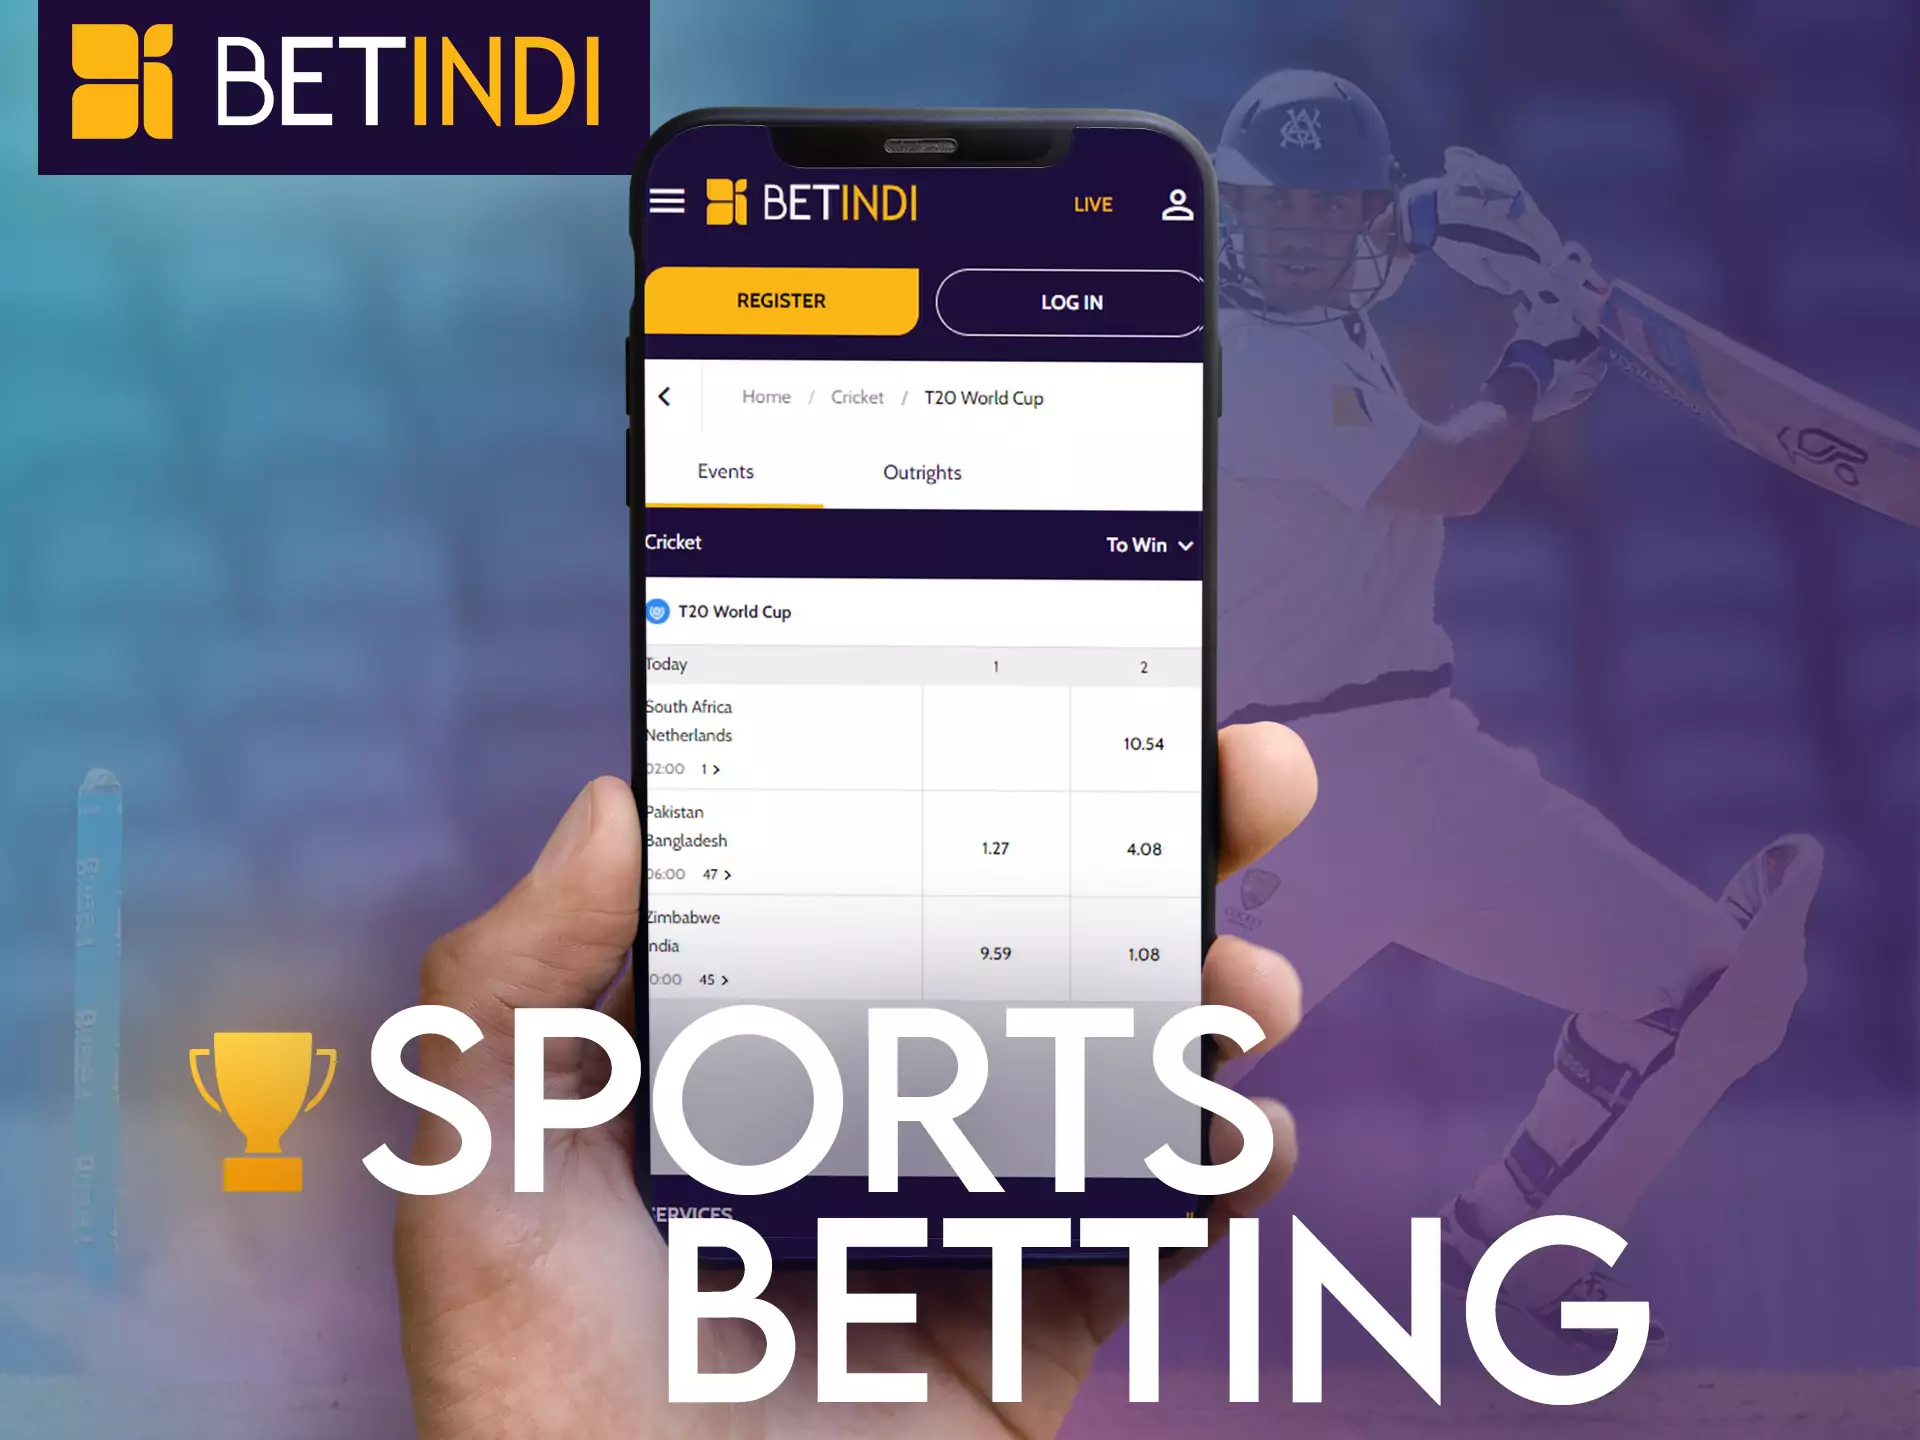 Place bets and support your favorite teams of any sport on Betindi.